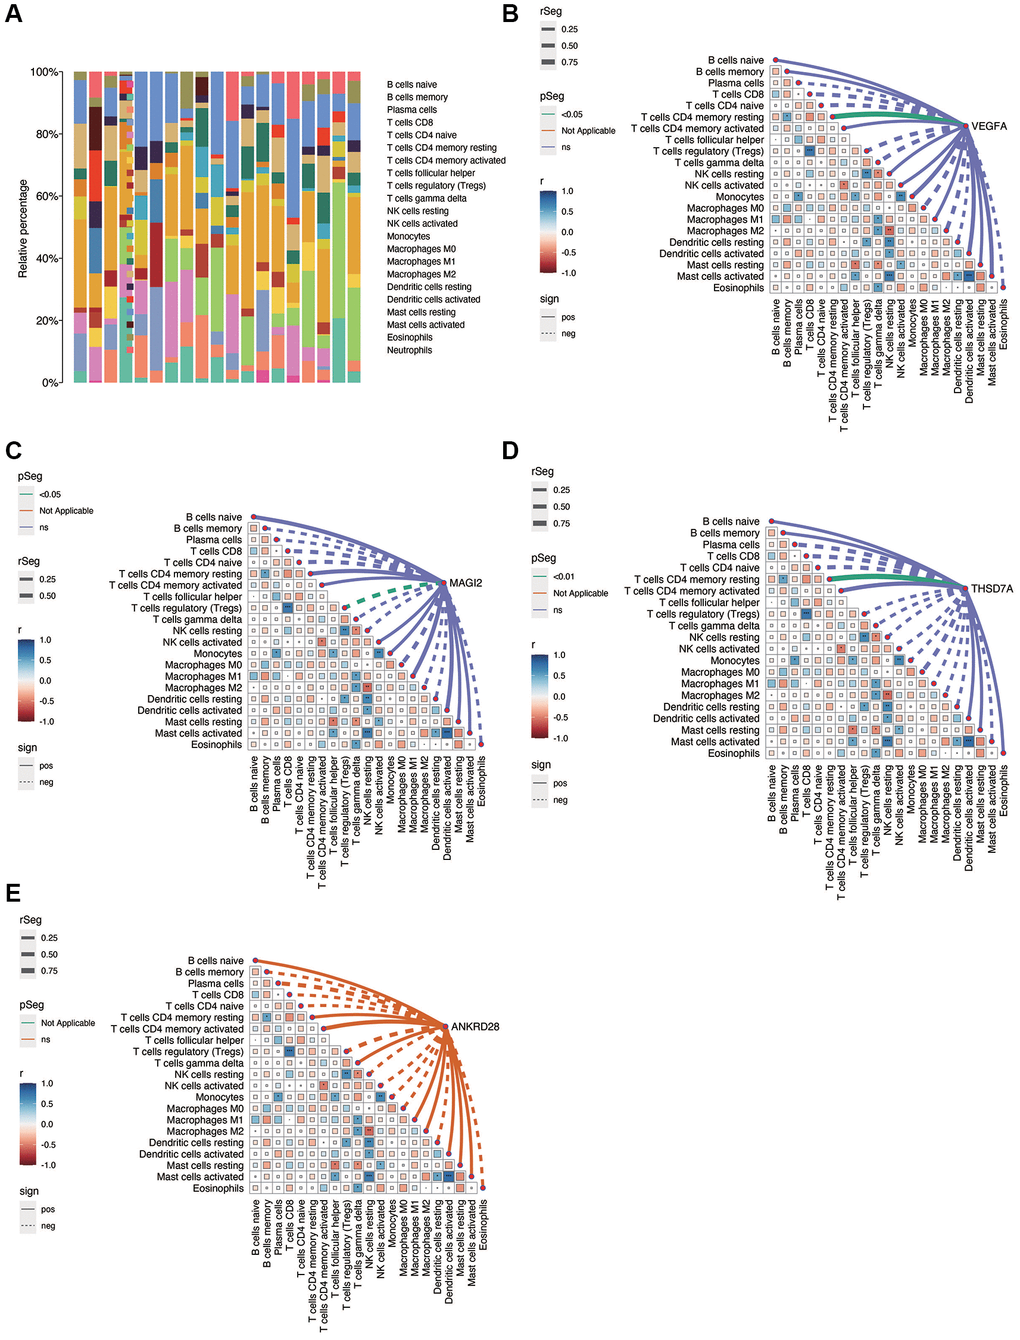 Immunocorrelation analysis in DN. (A) Overview of immune cell infiltration in DN samples. (B–E) Correlation analysis between immune cell populations and the expression of key genes (VEGFA, MAGI2, THSD7A), revealing significant associations and suggesting potential immunomodulatory roles in DN.